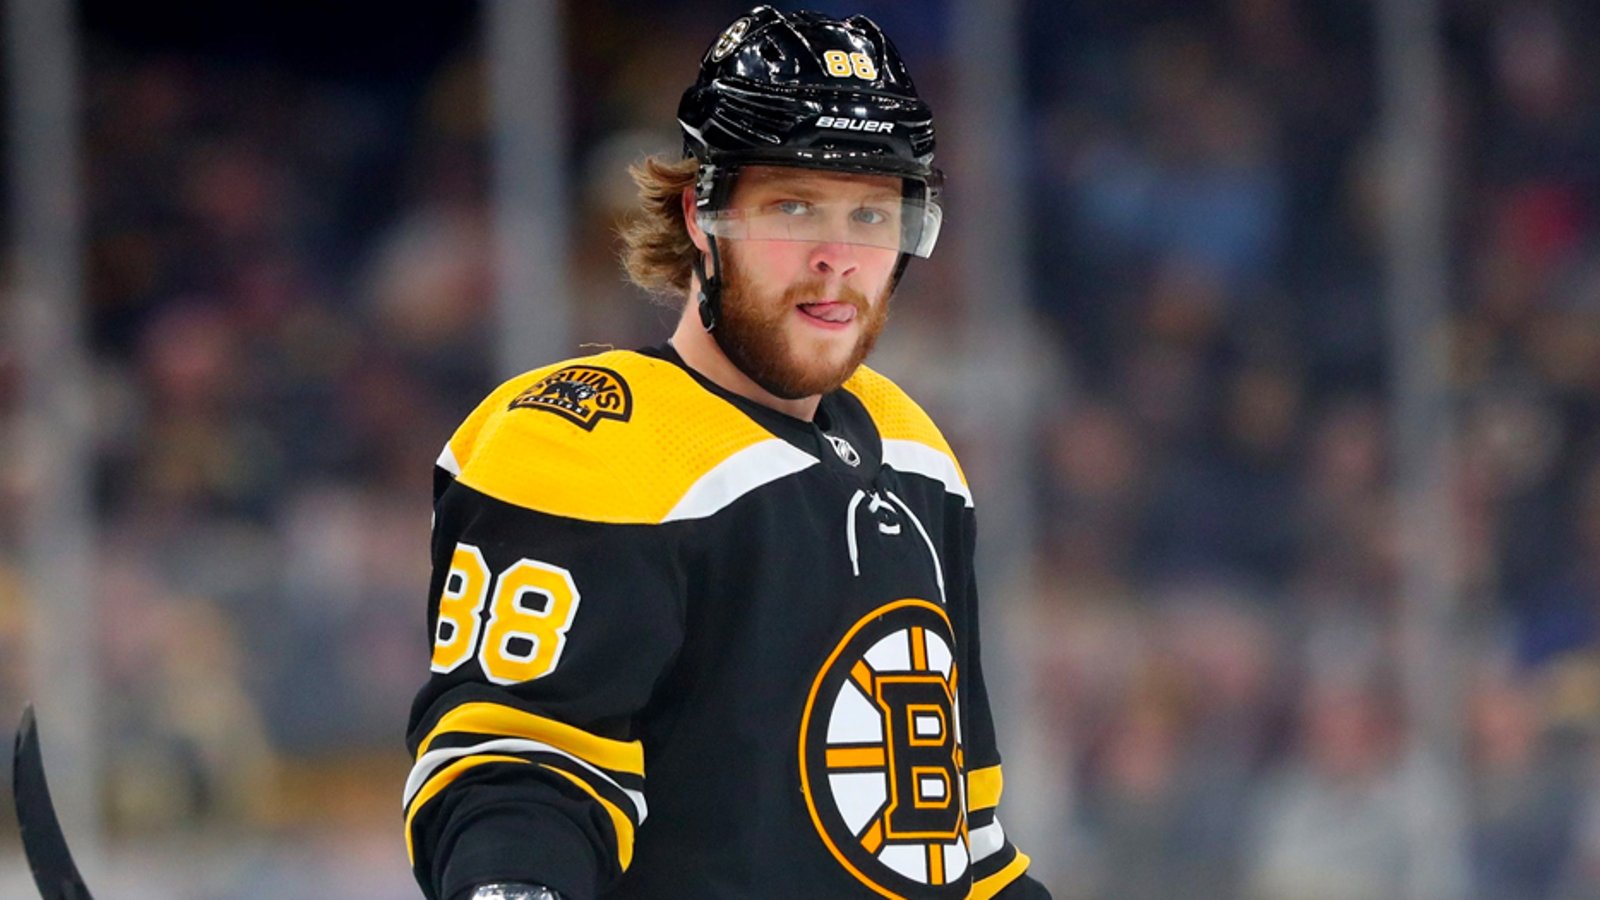 Breaking: Pastrnak officially placed into quarantine by the Bruins